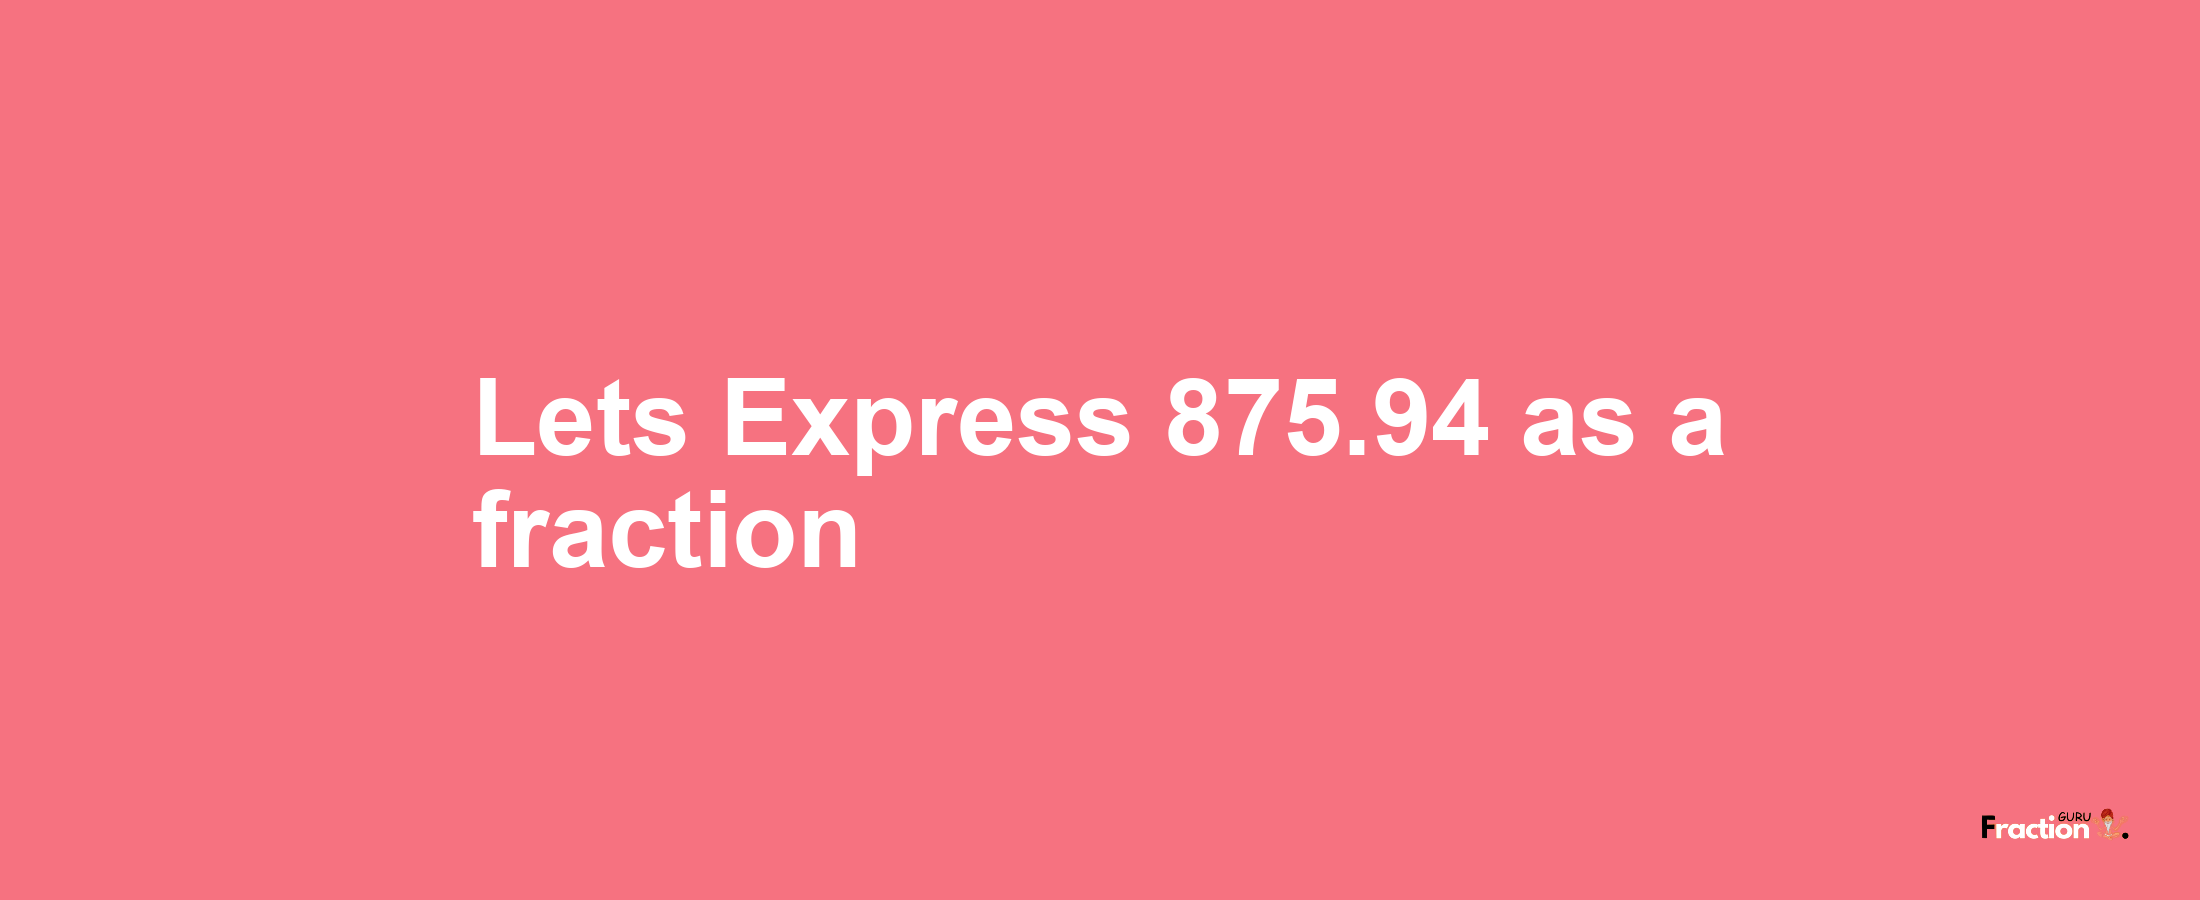 Lets Express 875.94 as afraction